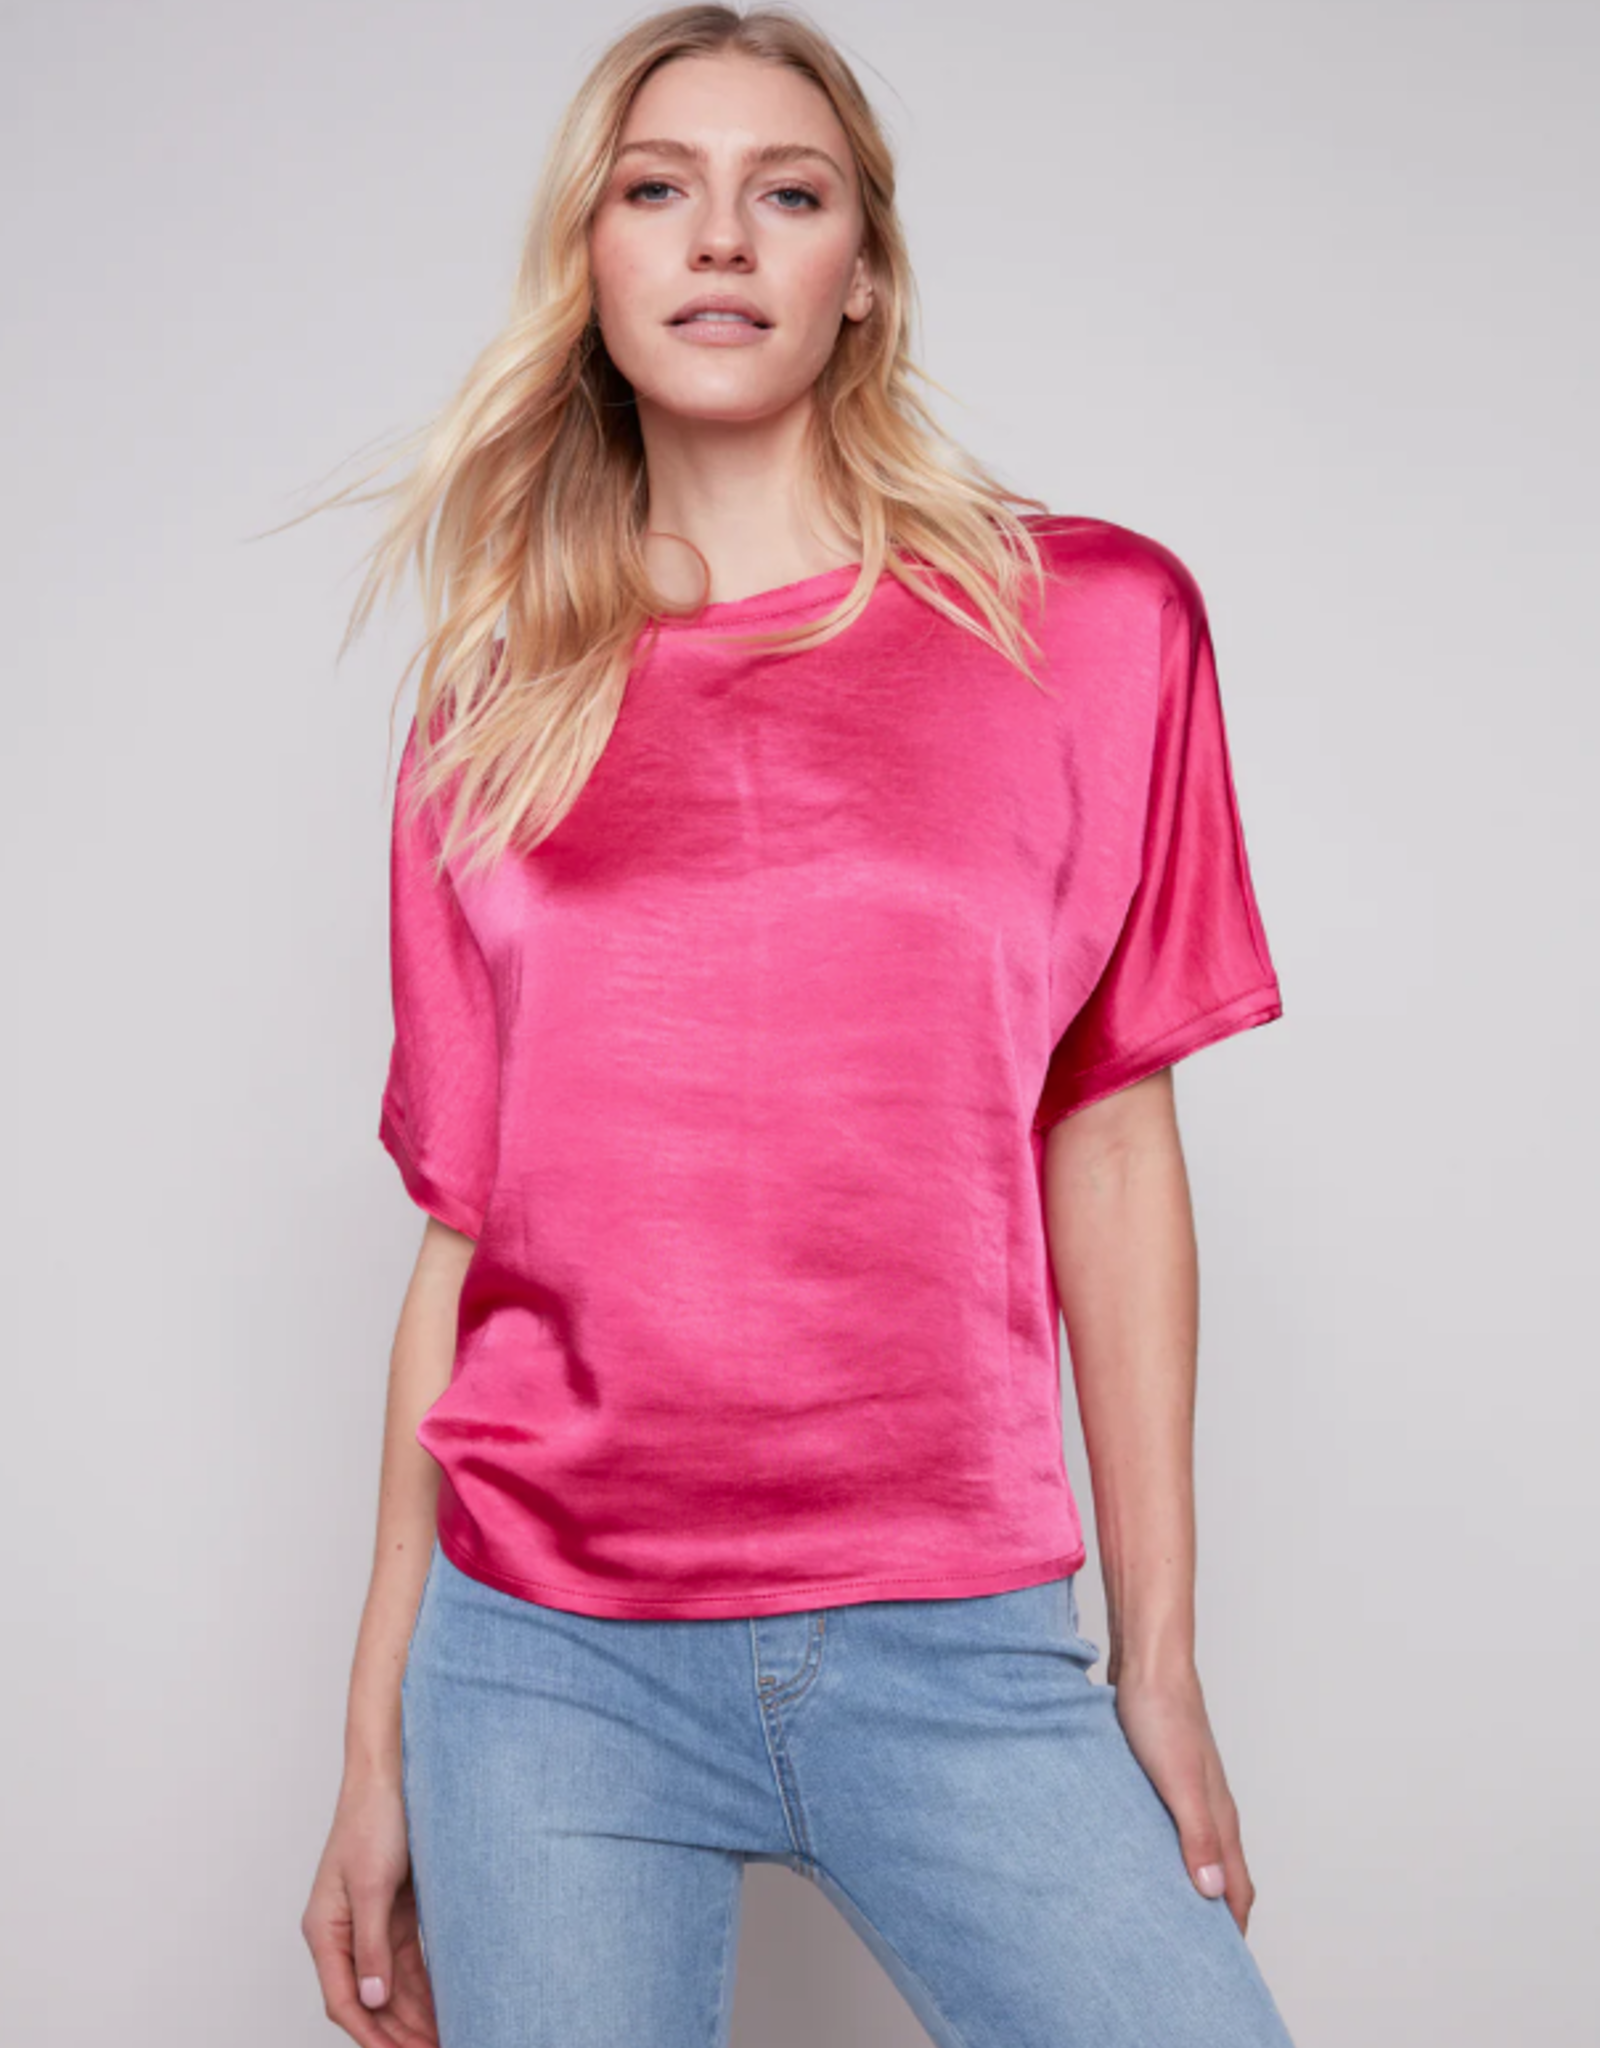 Charlie B Hot Pink Satin Front Crew Neck Short Sleeve Top w/Double Raw Hem